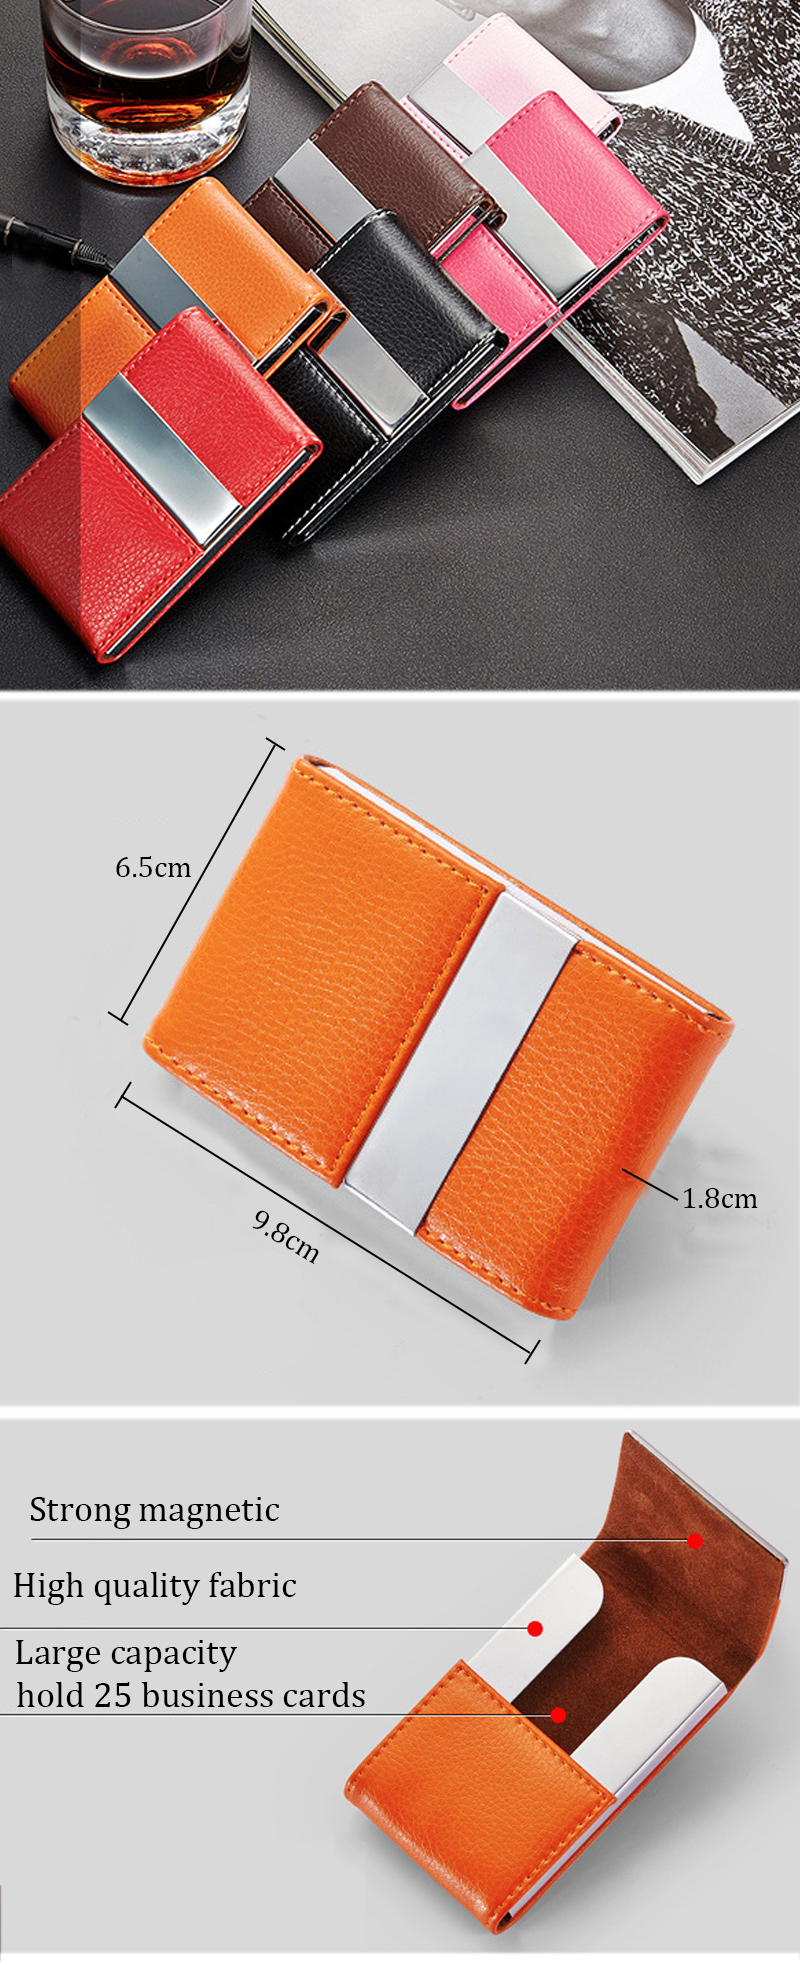 IPReereg-PU-Leather-Card-Holder-Double-Open-Credit-Card-Case-ID-Card-Storage-Box-Business-Travel-1364325-1